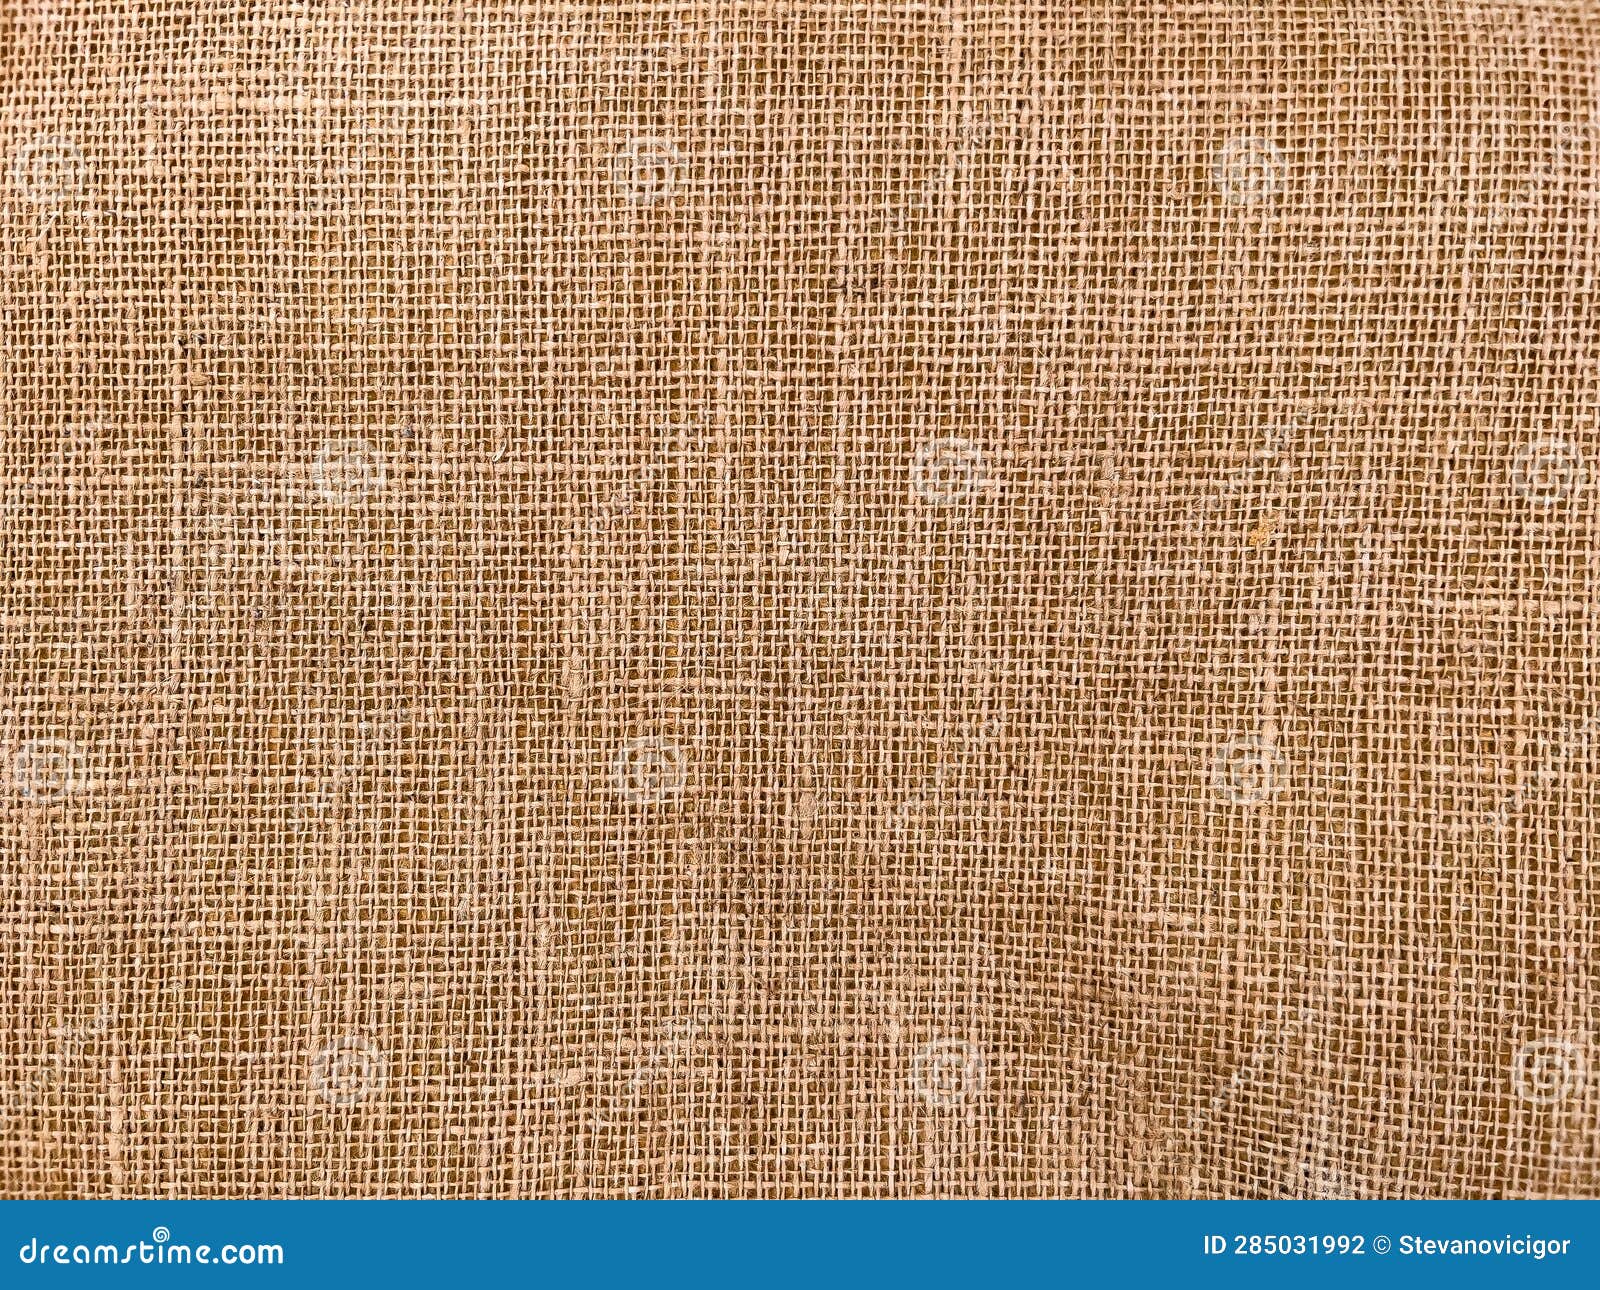 Woven Synthetic Jute Carpet Backing Pattern As Background Stock